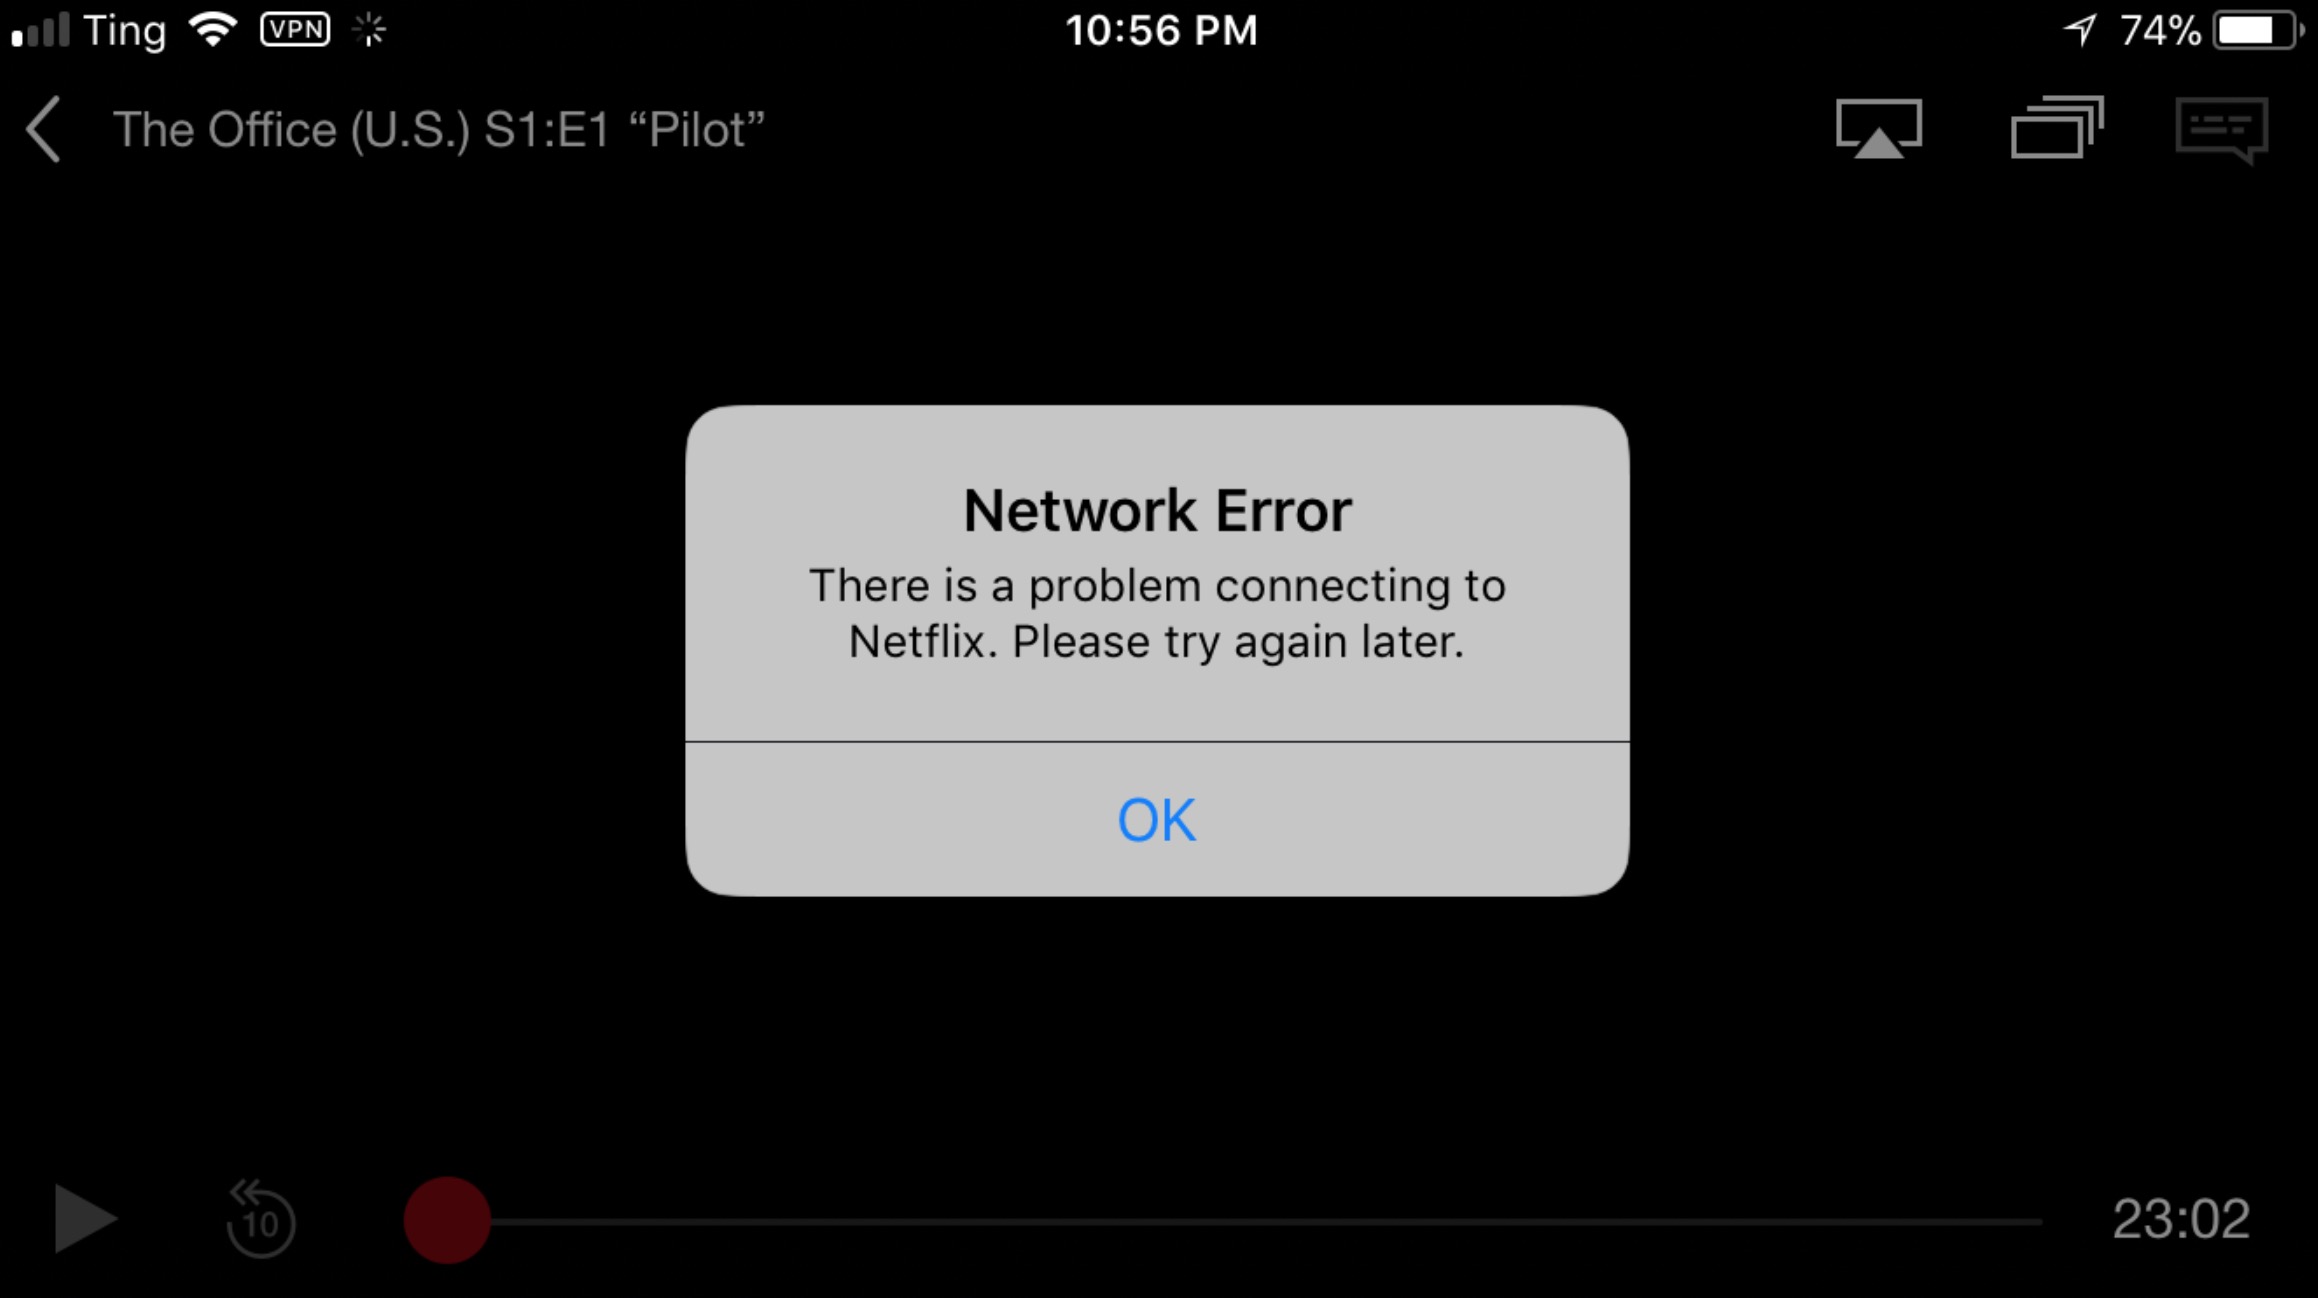 If you are using a VPN or proxy service, temporarily disable it.
Check if Netflix works without the VPN or proxy.